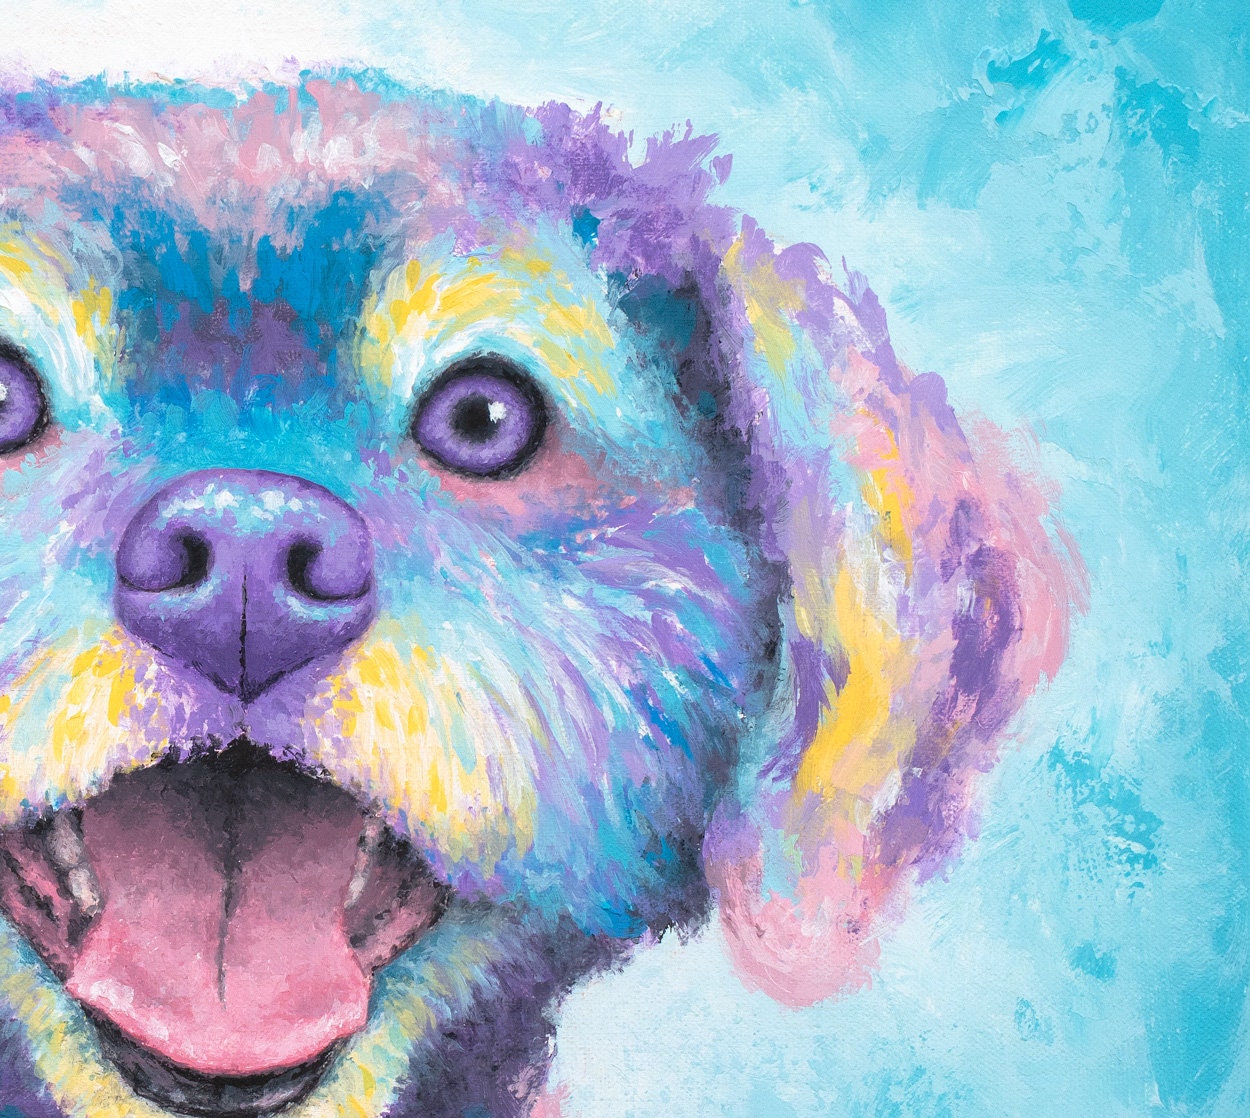 Shih-Poo Dog Art on CANVAS or PAPER - Shih Poo Print for Wall Decor or Gifts. Shihpoo Painting by Krystle Cole